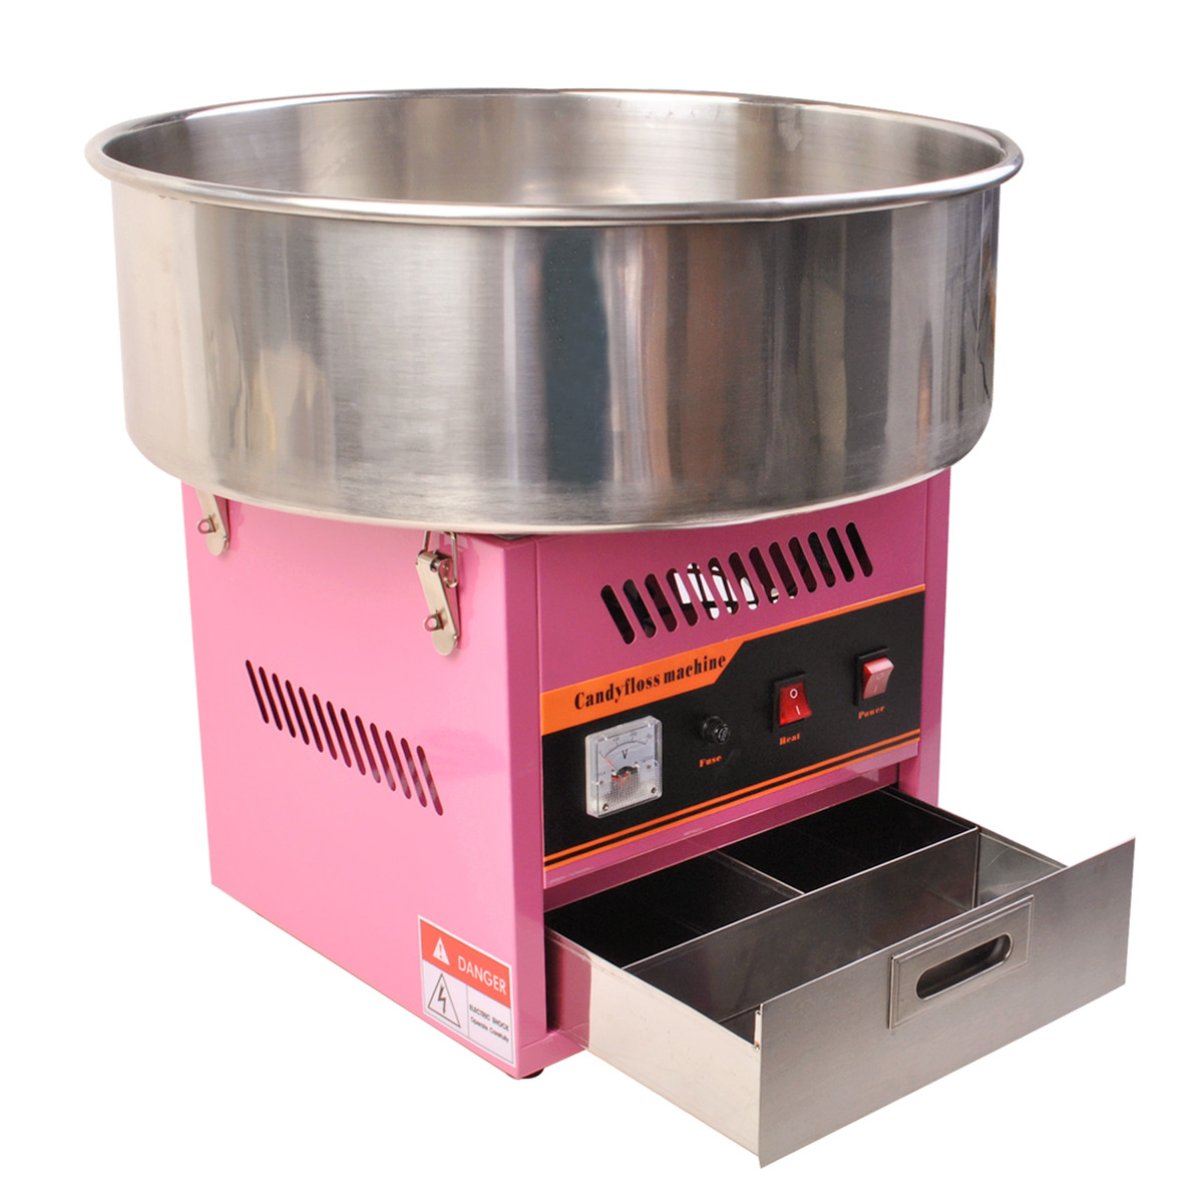 Gold Medal Candy Floss Machines - A1 EQUIPMENT